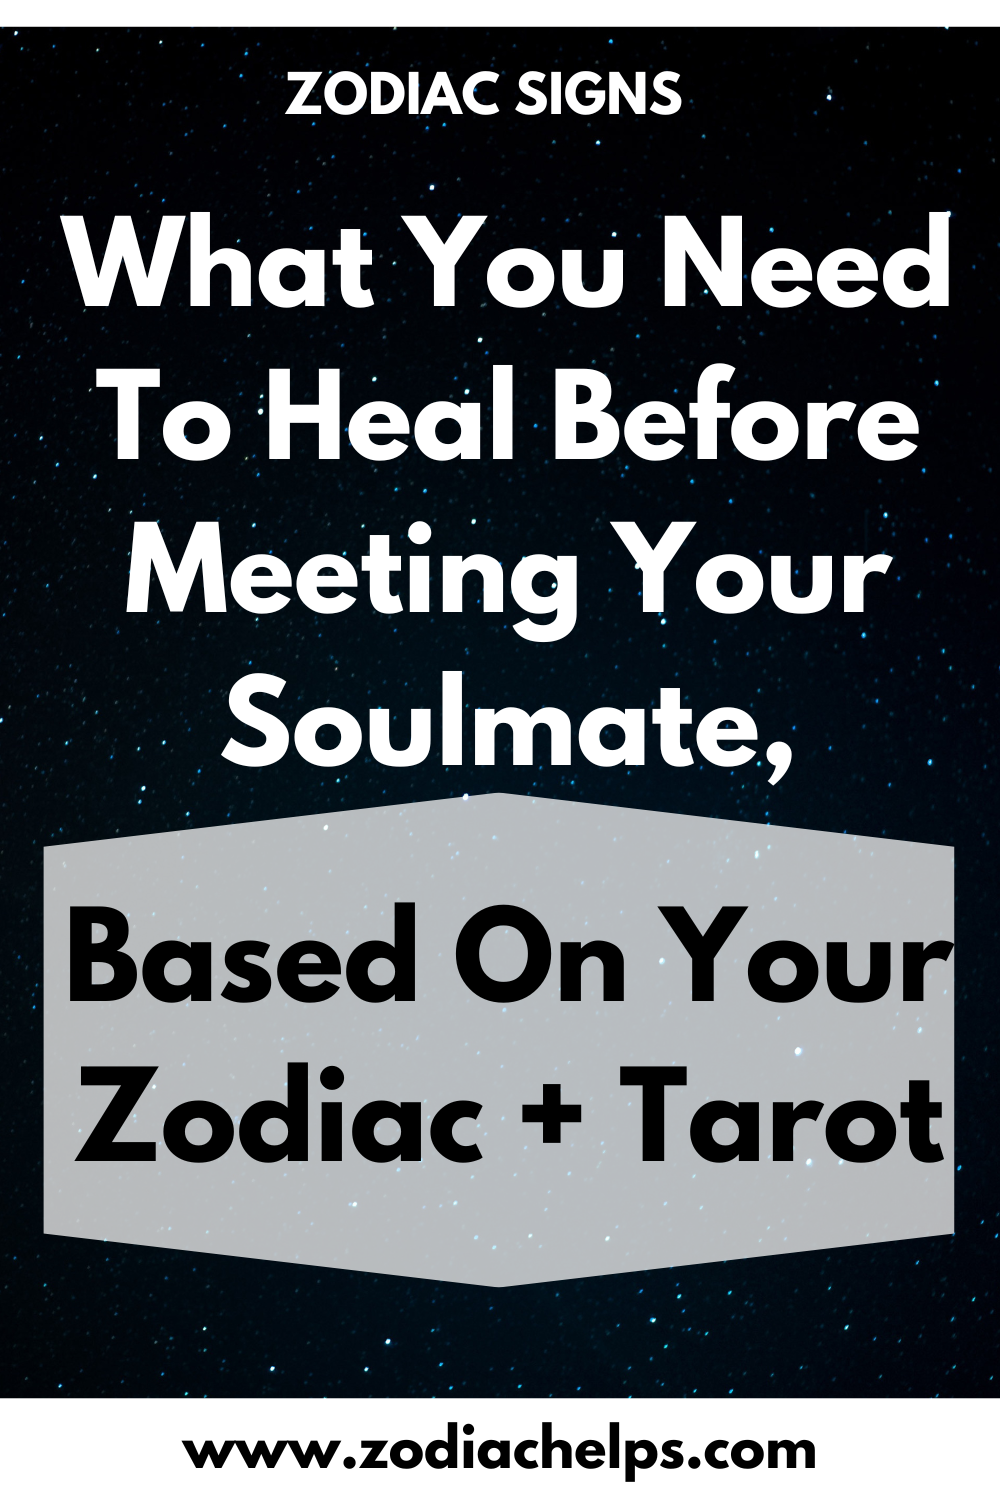 What You Need To Heal Before Meeting Your Soulmate, Based On Your Zodiac + Tarot